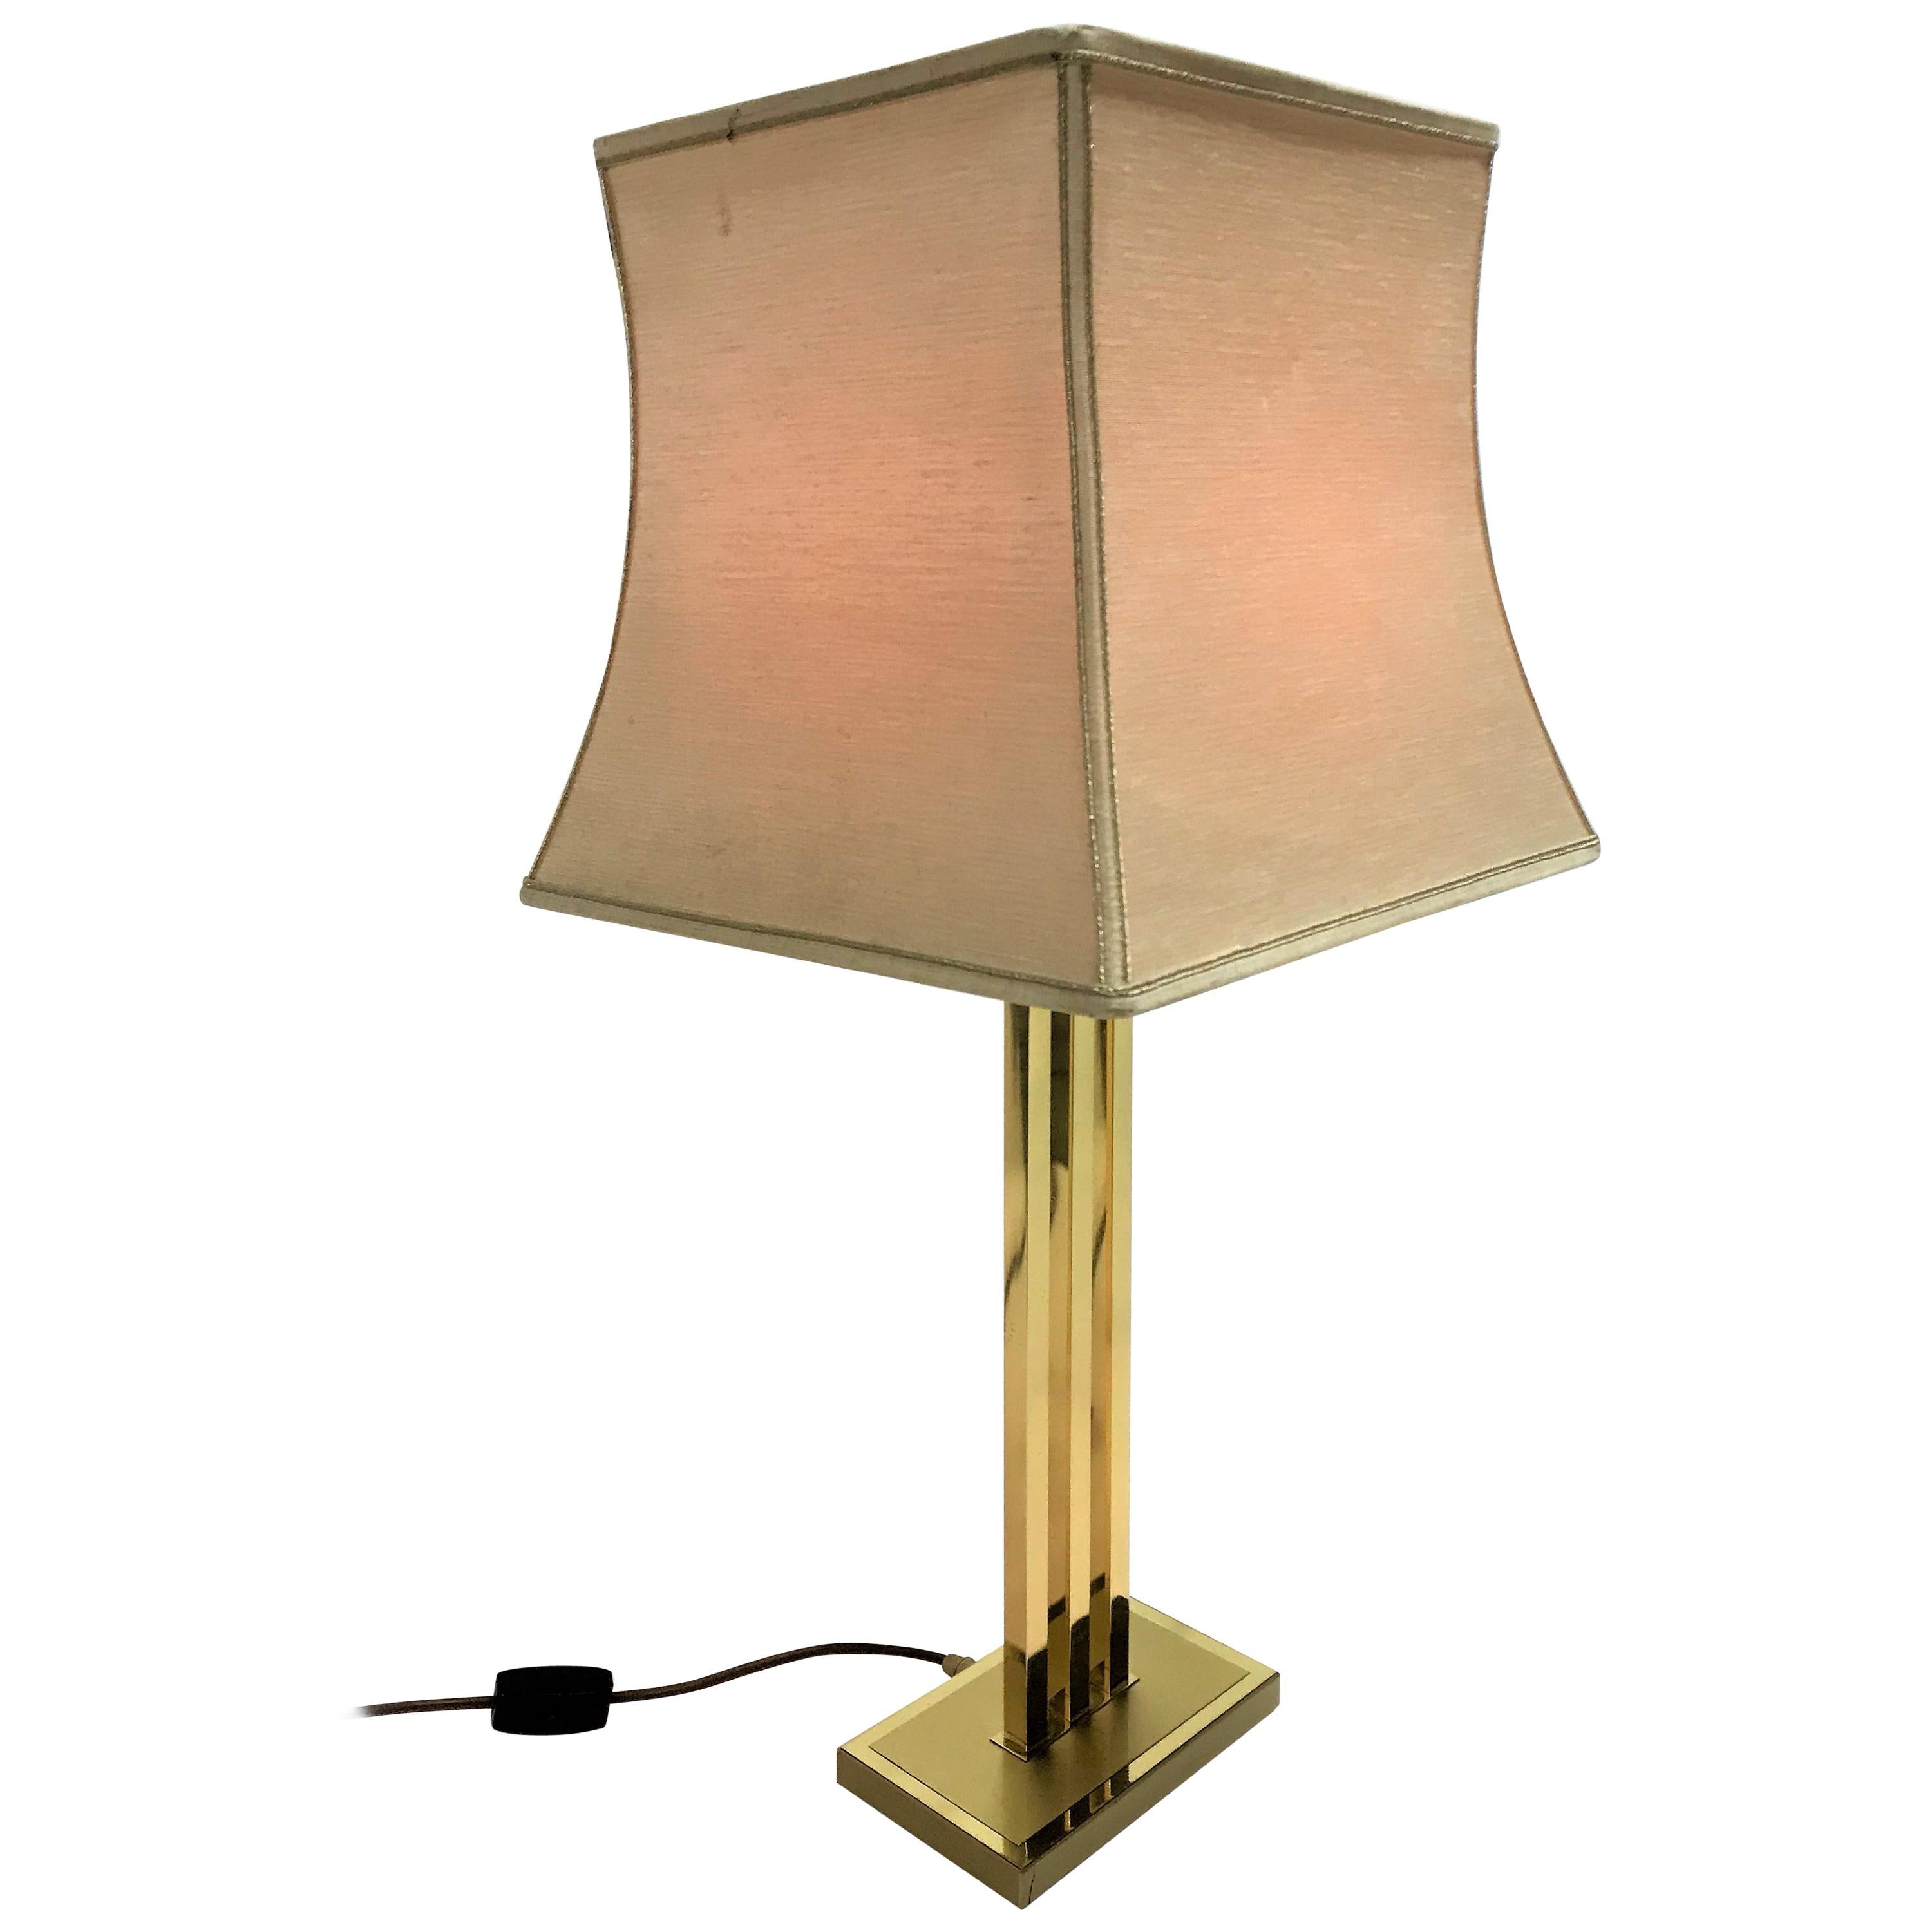 Beautiful table lamp by Willy Rizzo for Lusterie Deknudt.

Although dating from the 1970s this table lamp look modern due to the timeless design.

Finished with a beautiful lamp shade.

The lamp emits a warm light.

Labeled at the